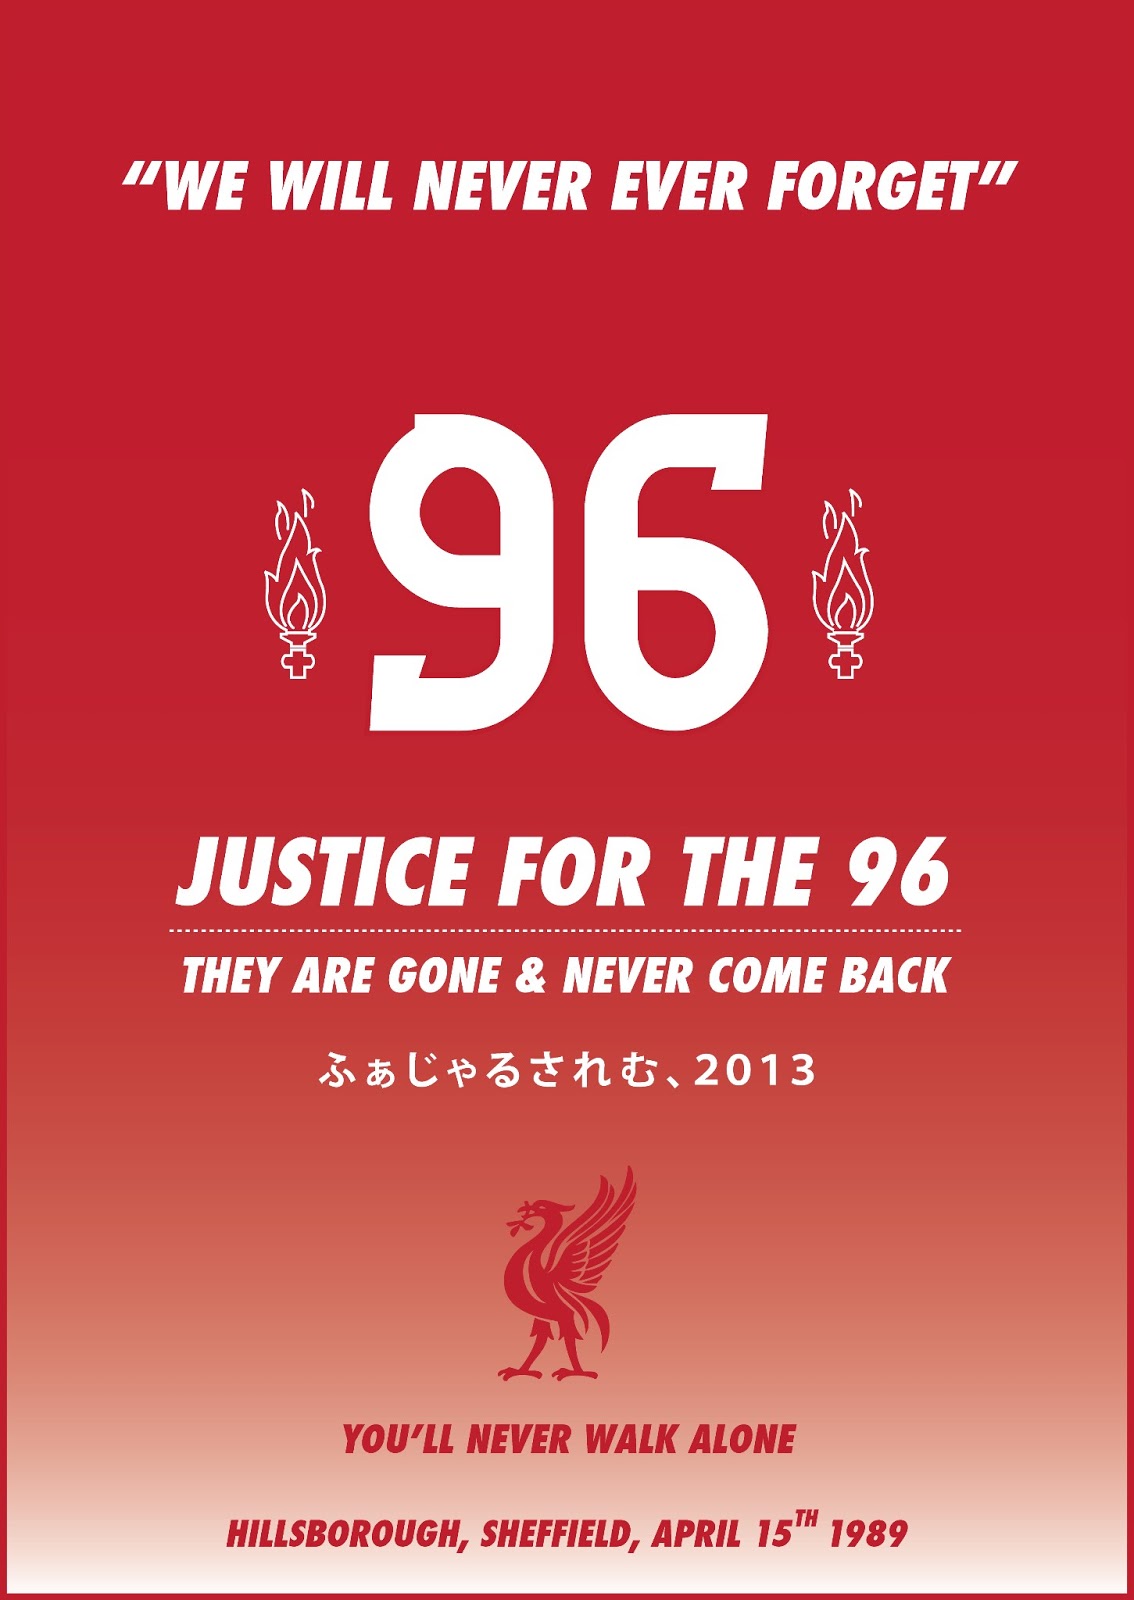 JUSTICE FOR THE 96